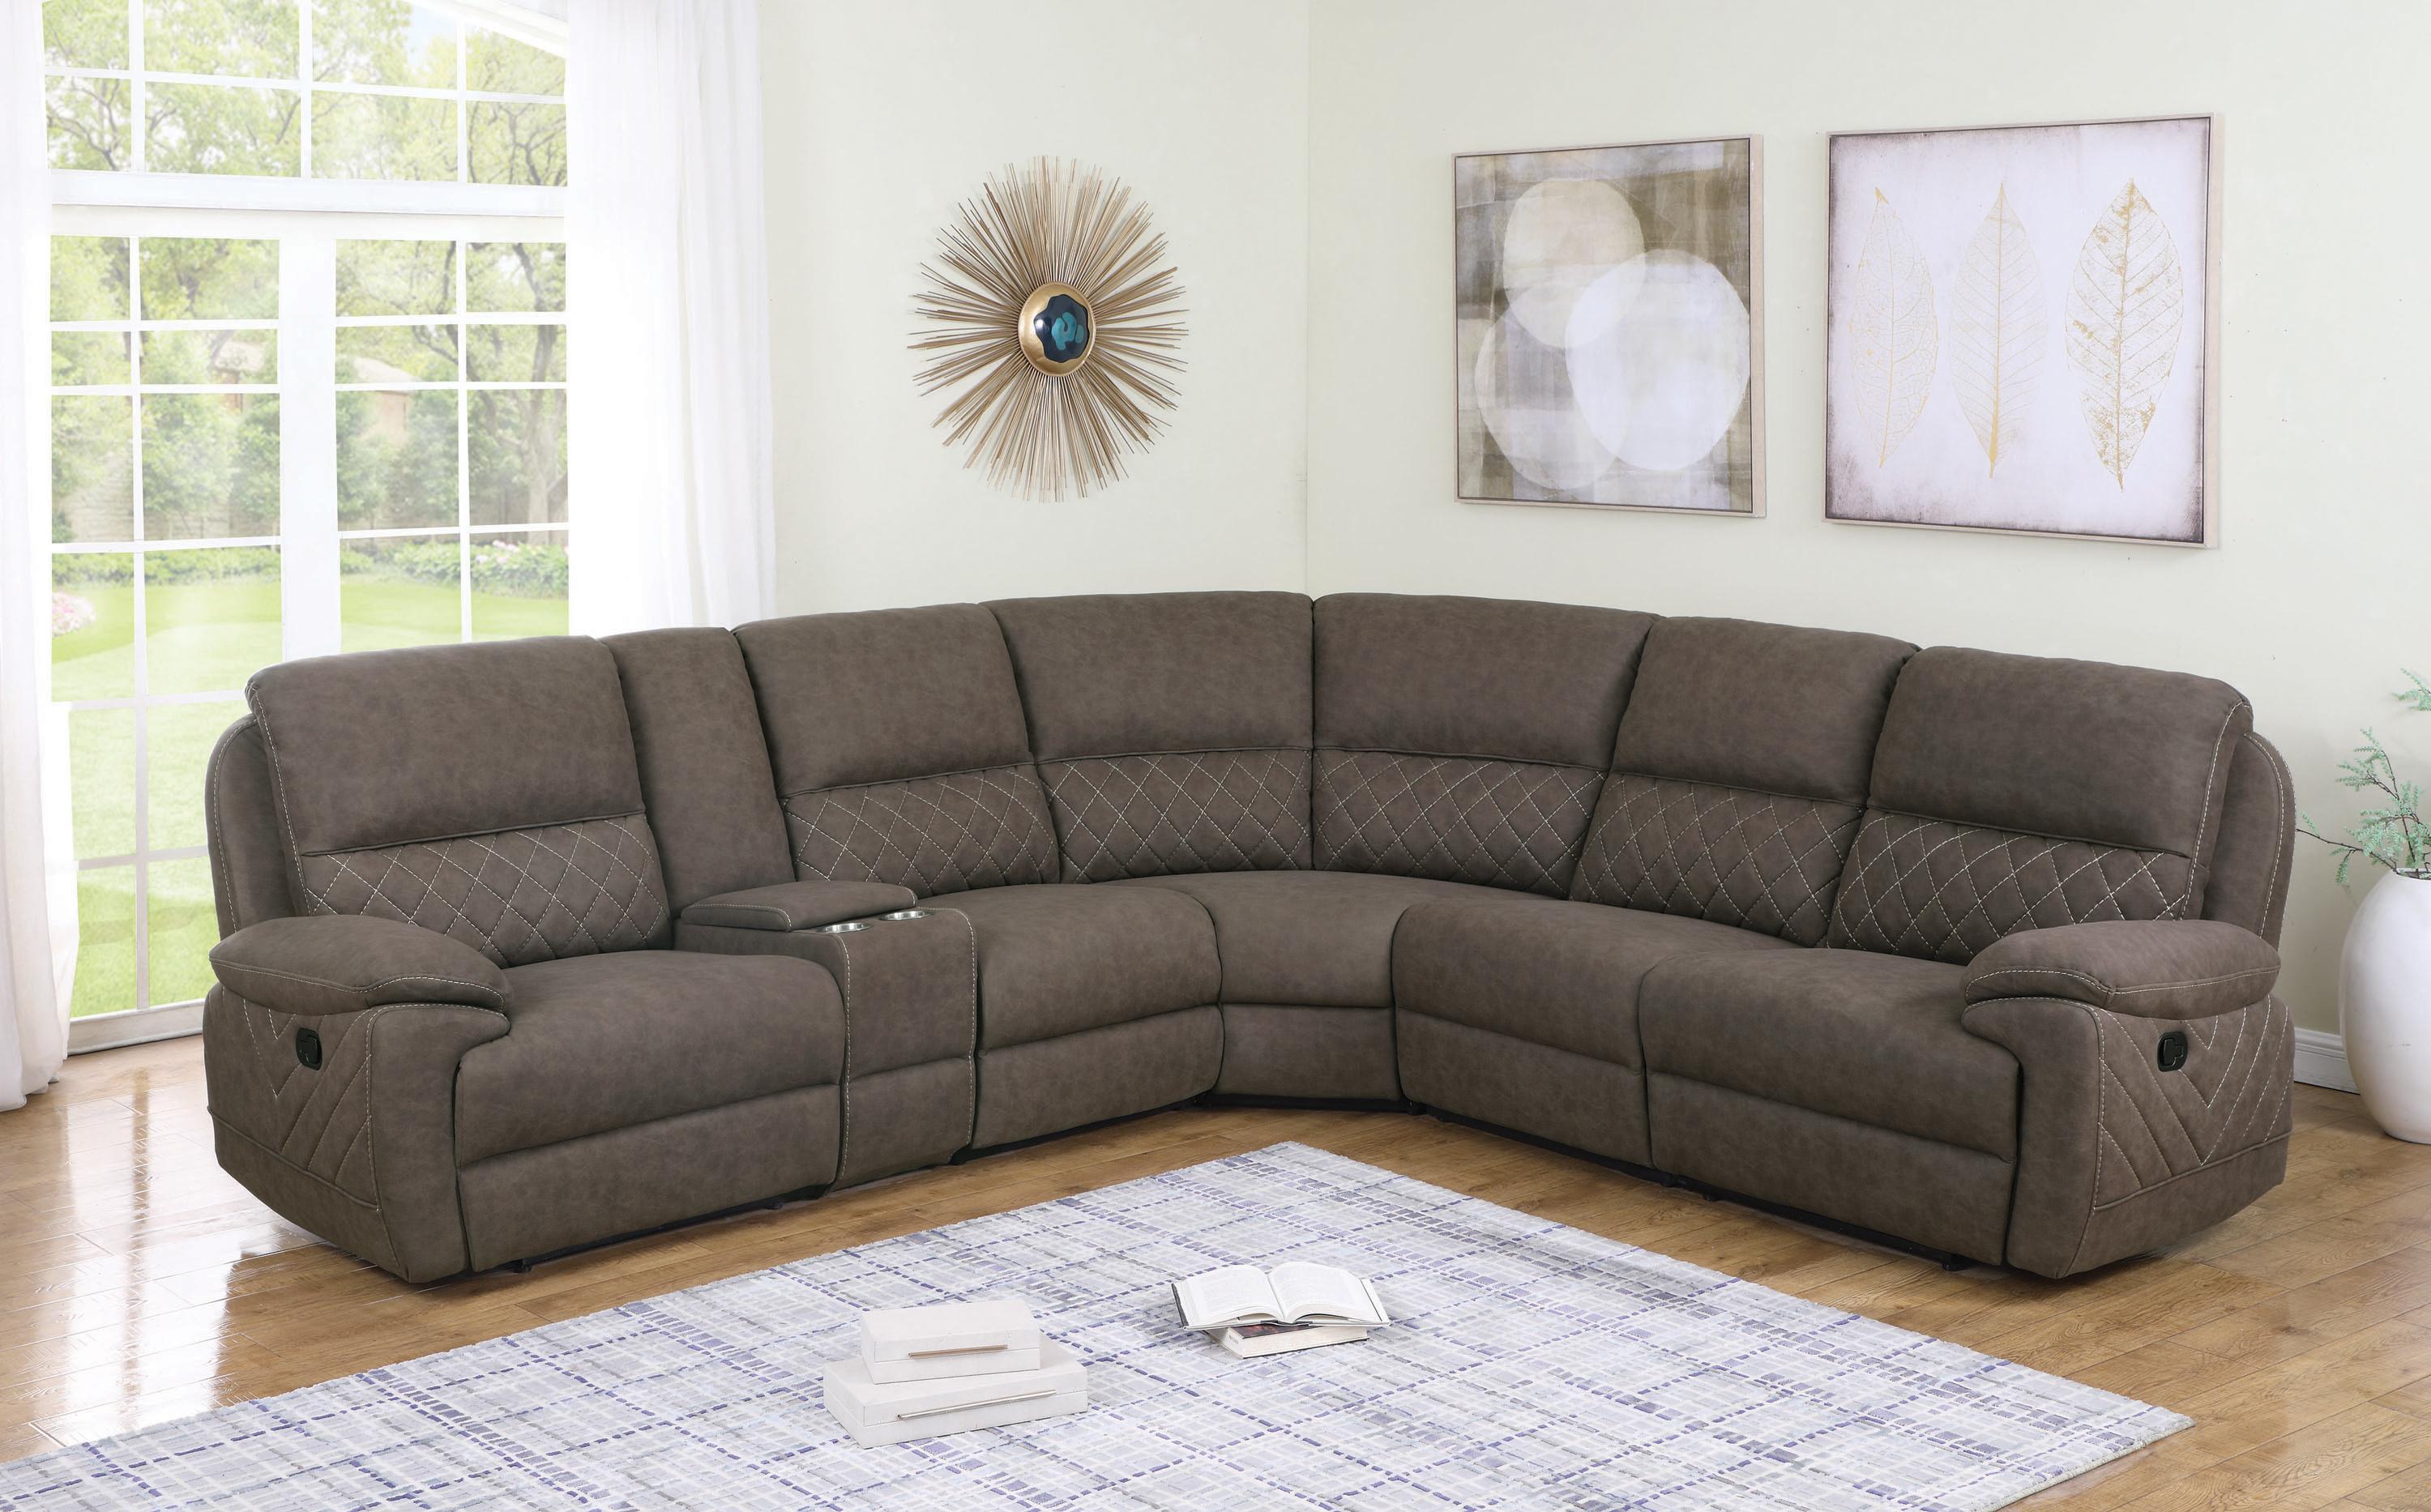 Transitional Motion Sectional 608980 Variel 608980 in Taupe 